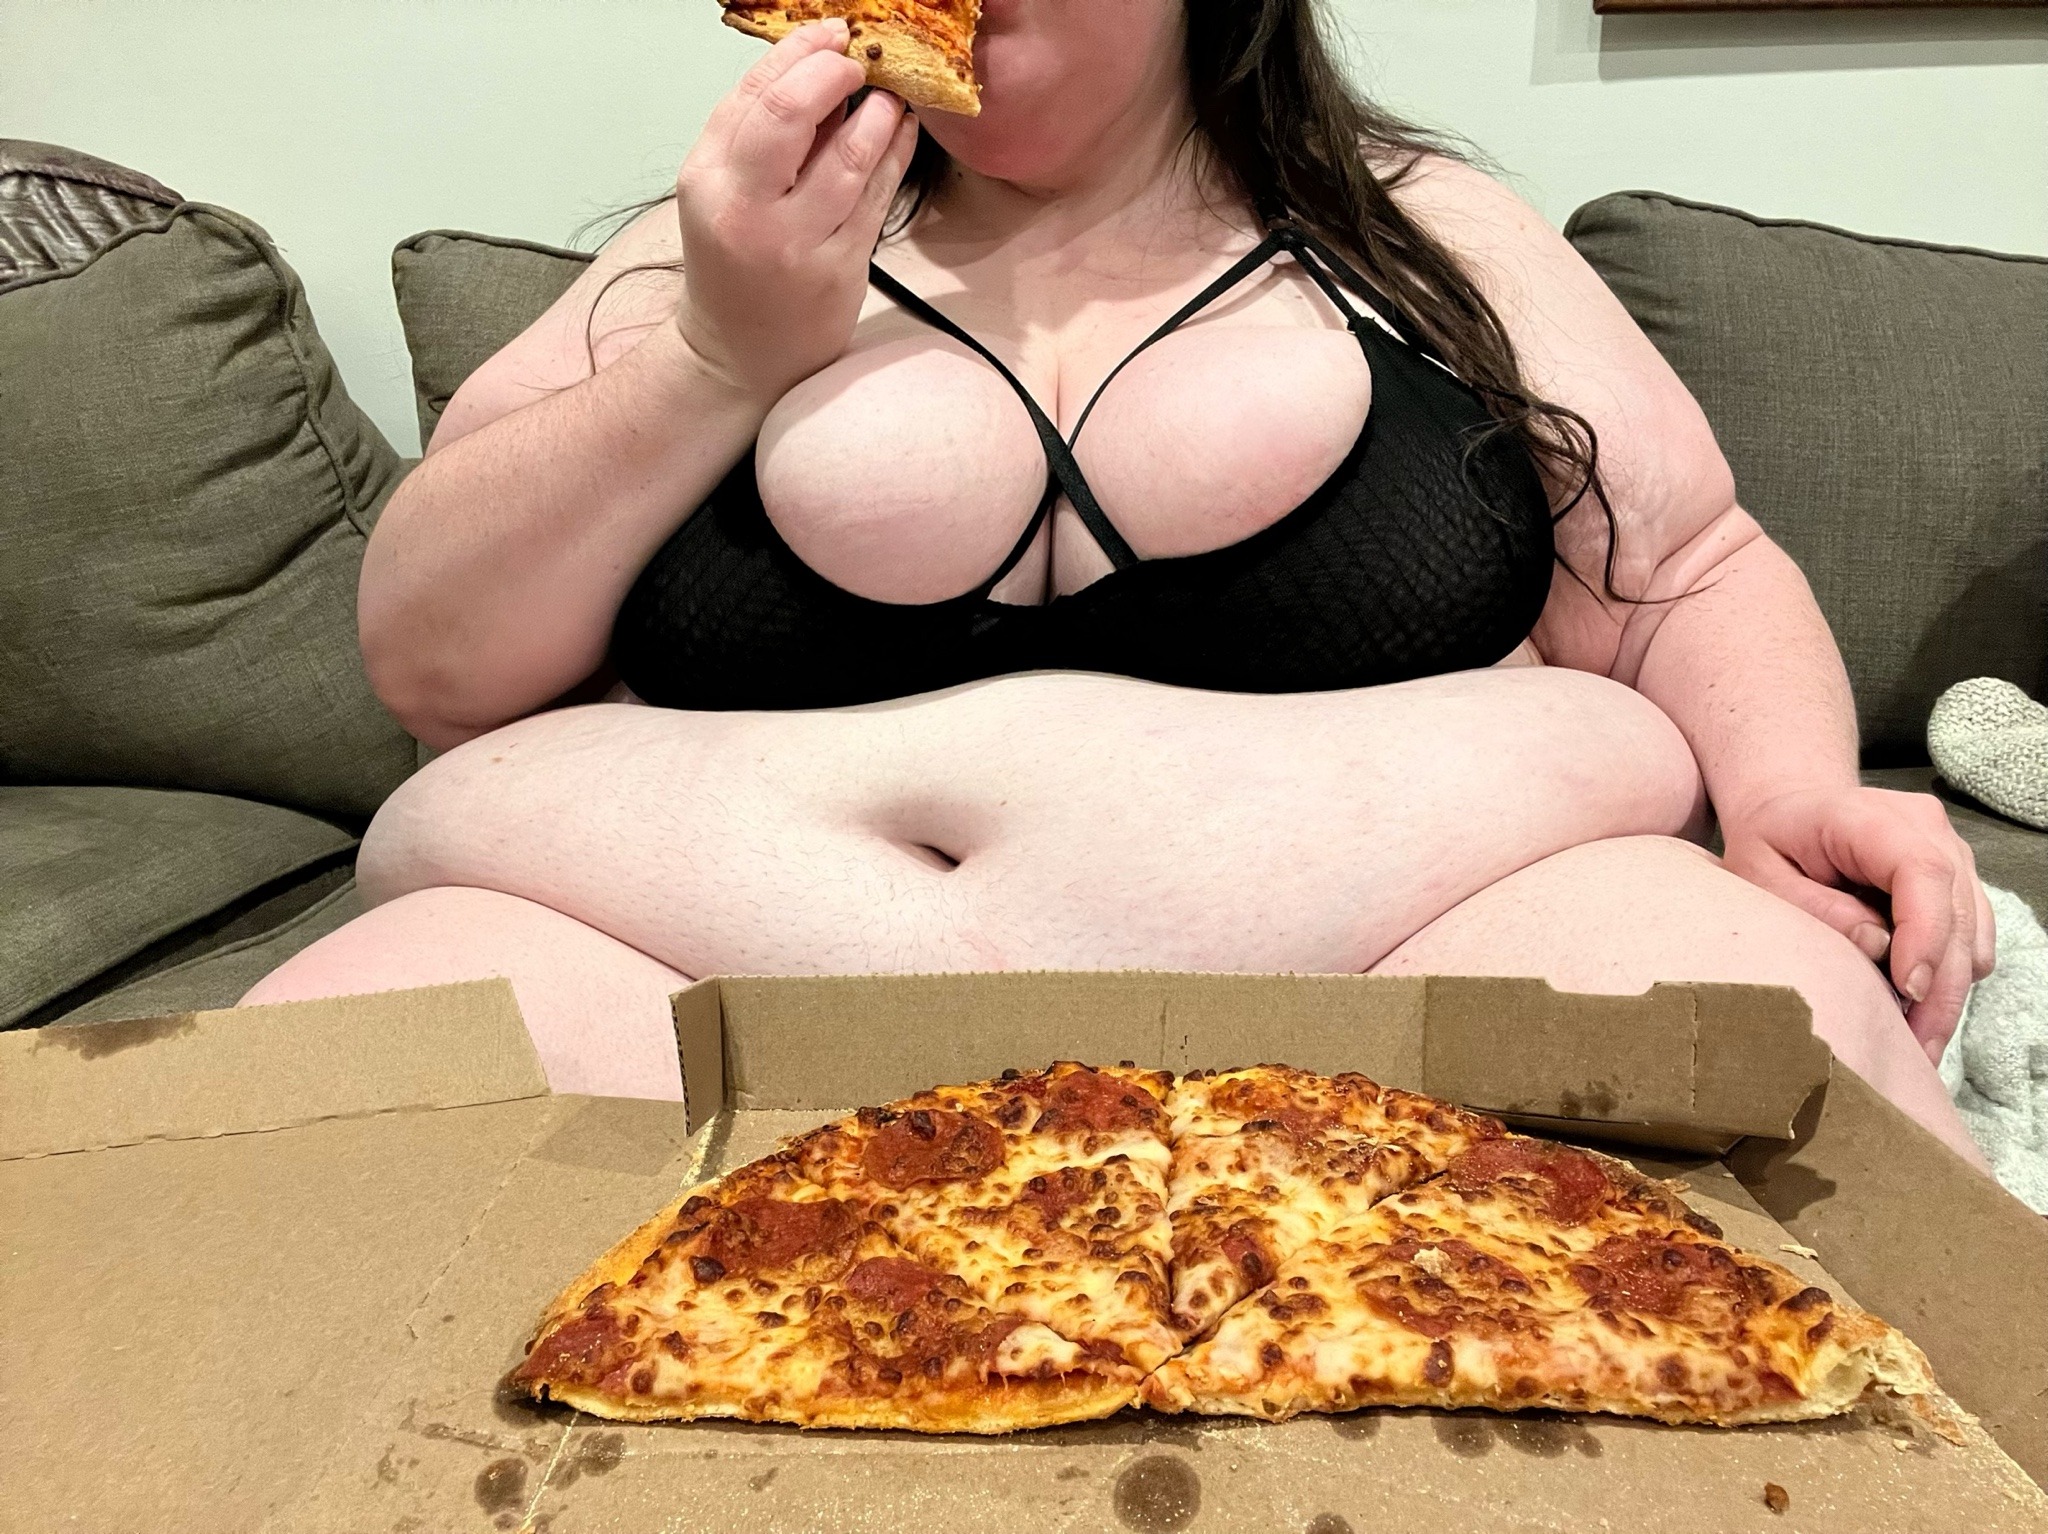 Porn wontstopeating-deactivated20220:Pizza pig photos